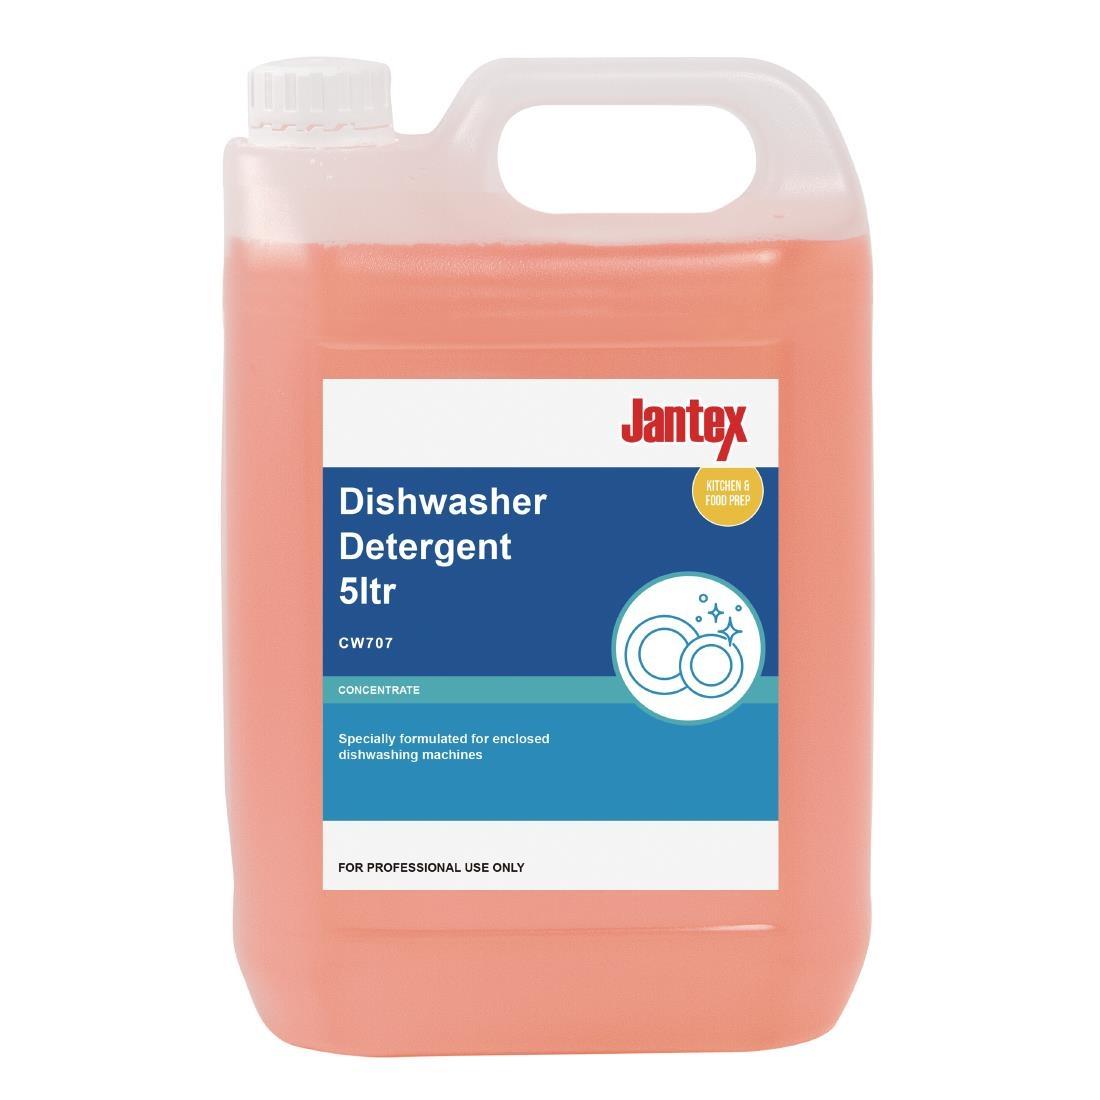 Jantex Dishwasher Detergent Concentrate 5Ltr (Twin Pack) - CW707  - 1